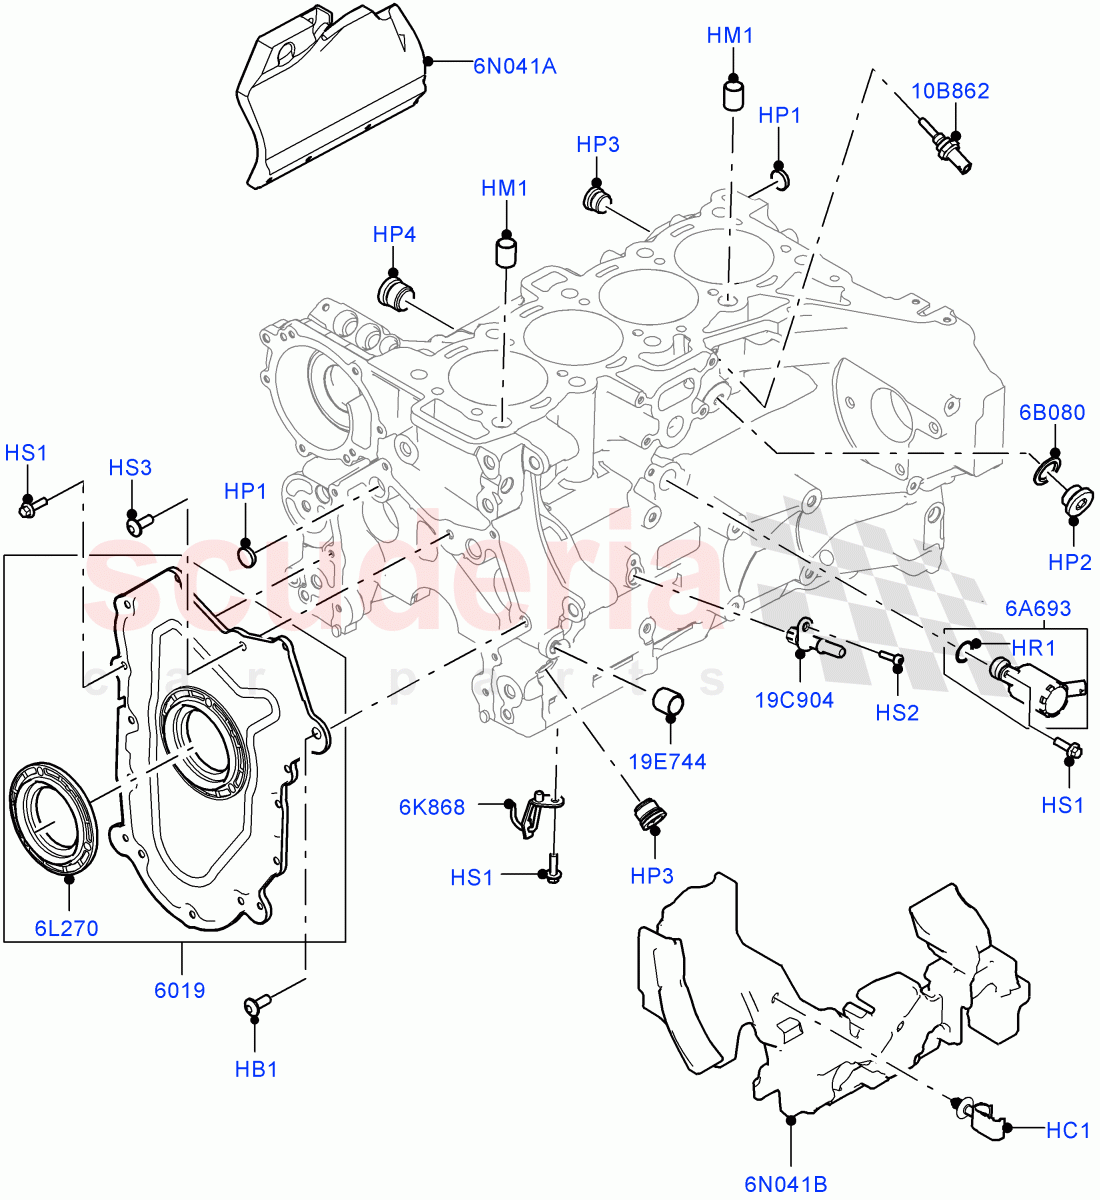 Cylinder Block And Plugs(Solihull Plant Build)(2.0L I4 DSL MID DOHC AJ200,2.0L I4 DSL HIGH DOHC AJ200)((V)FROMHA000001) of Land Rover Land Rover Discovery 5 (2017+) [2.0 Turbo Diesel]